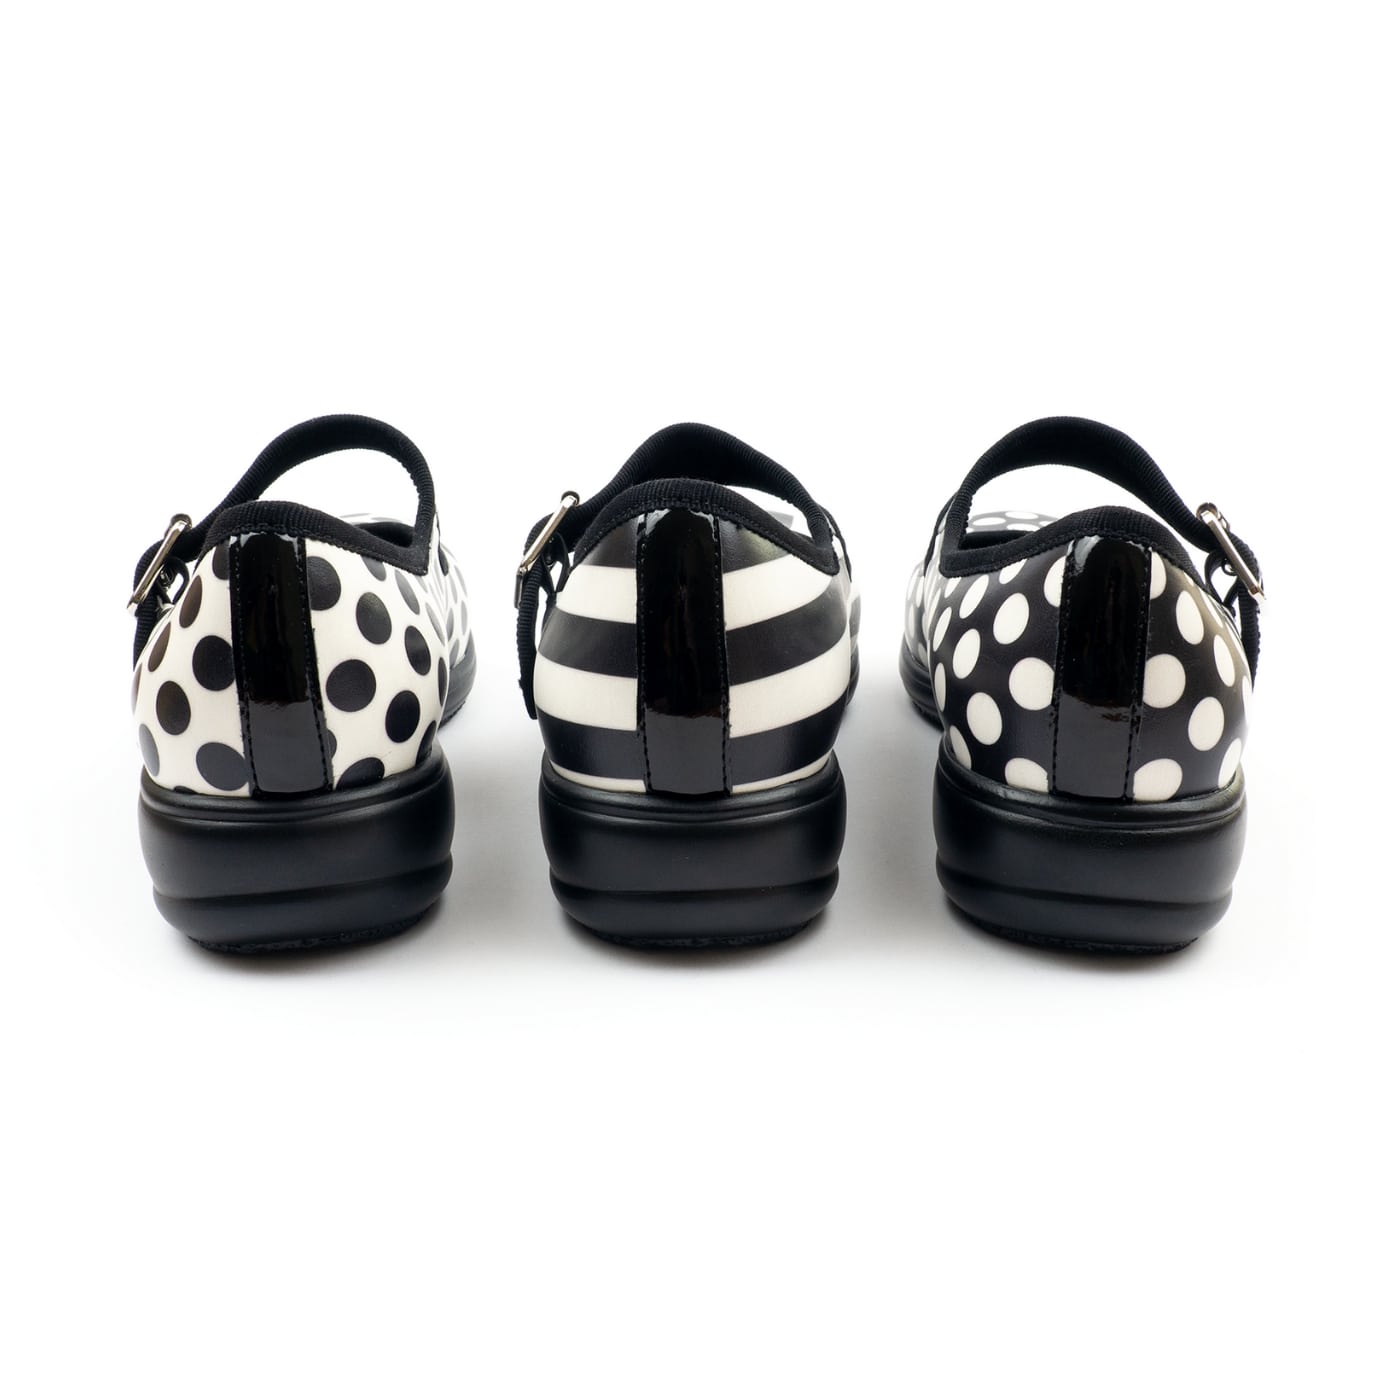 Monochrome Mary Janes by RainbowsAndFairies.com (Black & White - Polka Dots - Stripes - Mismatched Shoes - Shoes - Pair & A Spare) - SKU: FW_MARYJ_MONOC_ORG - Pic 09